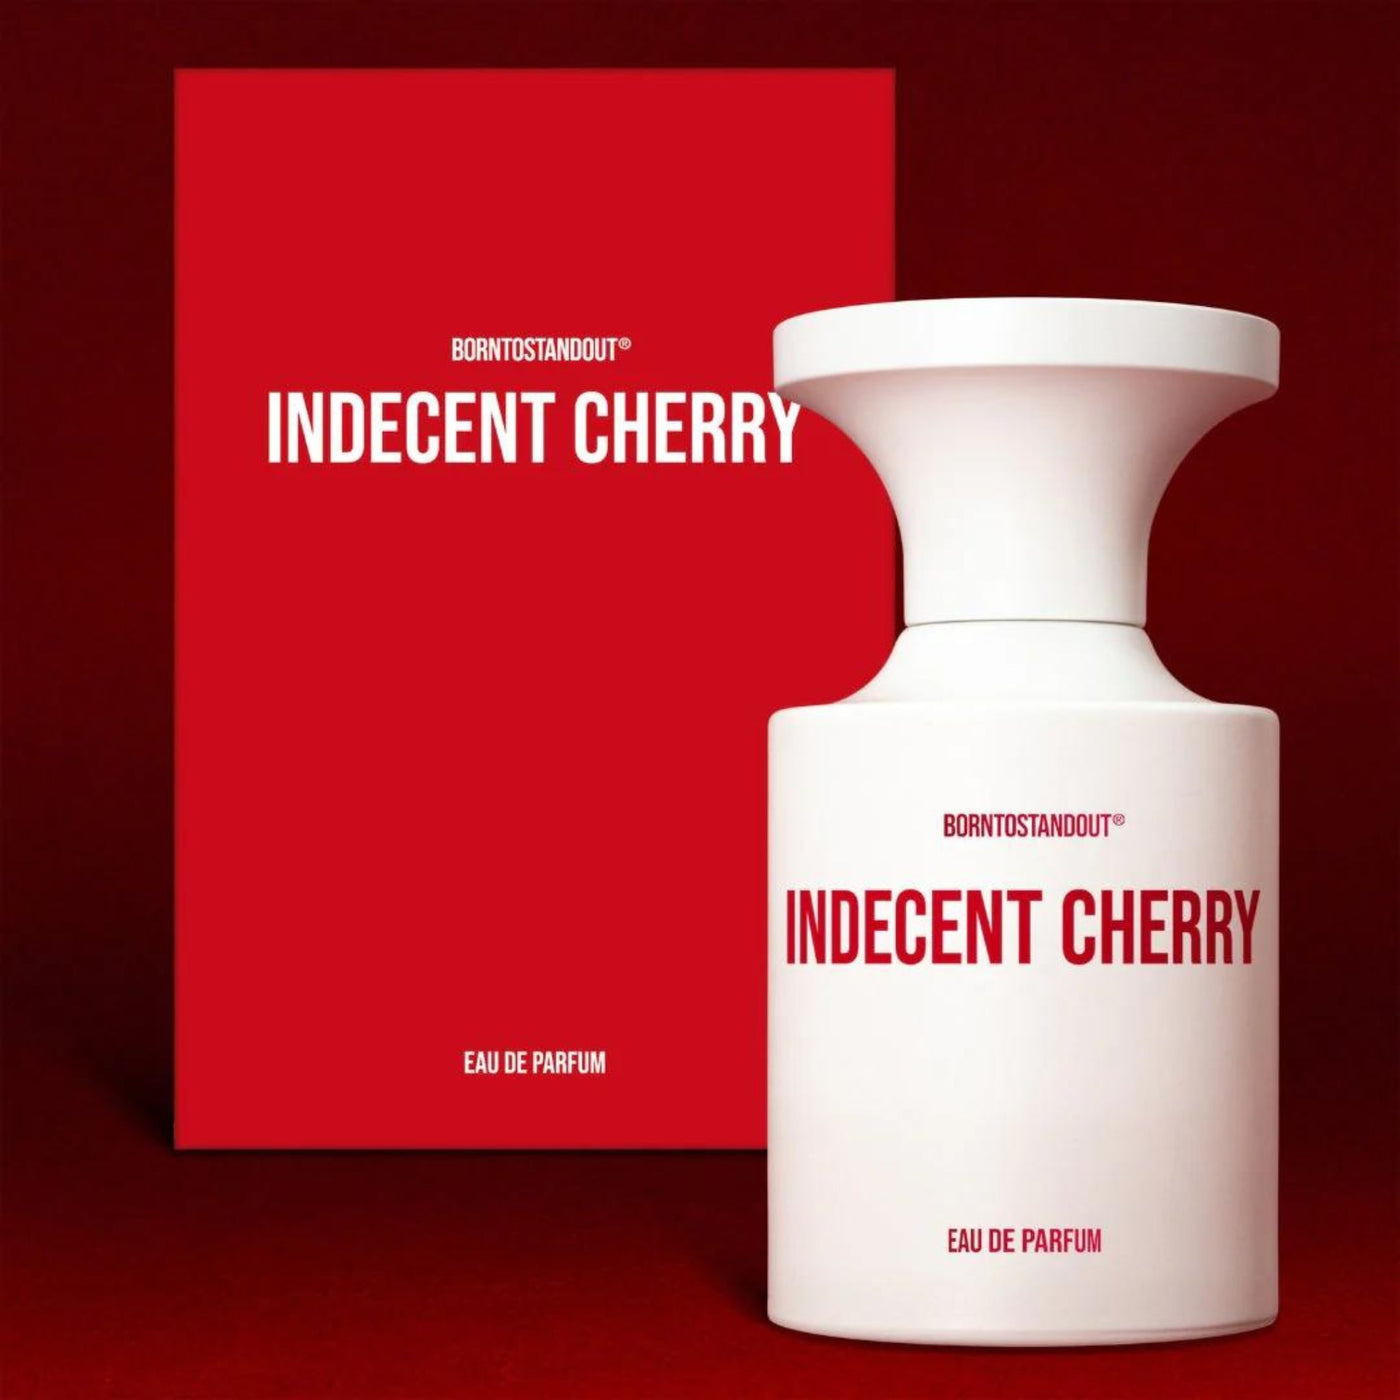 Born to stand out Indecent Cherry Perfume